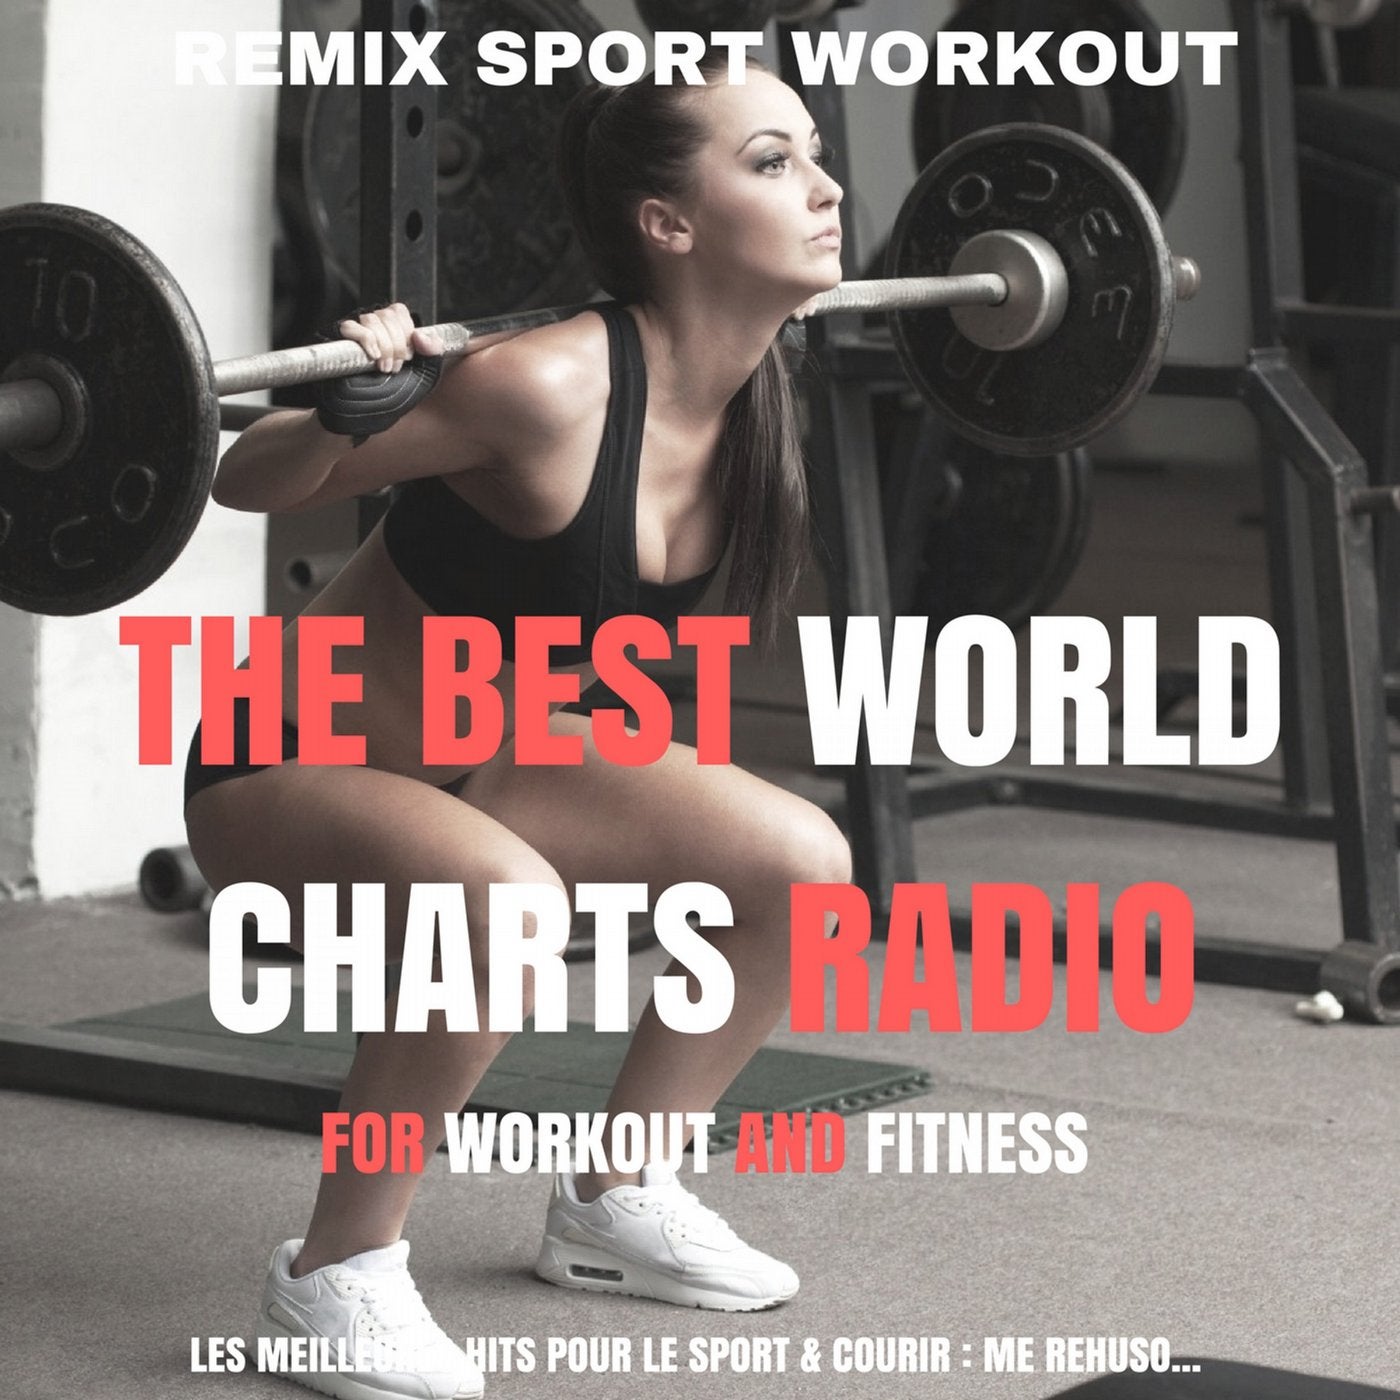 The Best World Charts Radio for Workout and Fitness (Les meilleures hits pour le sport & courir : Me Rehuso...)